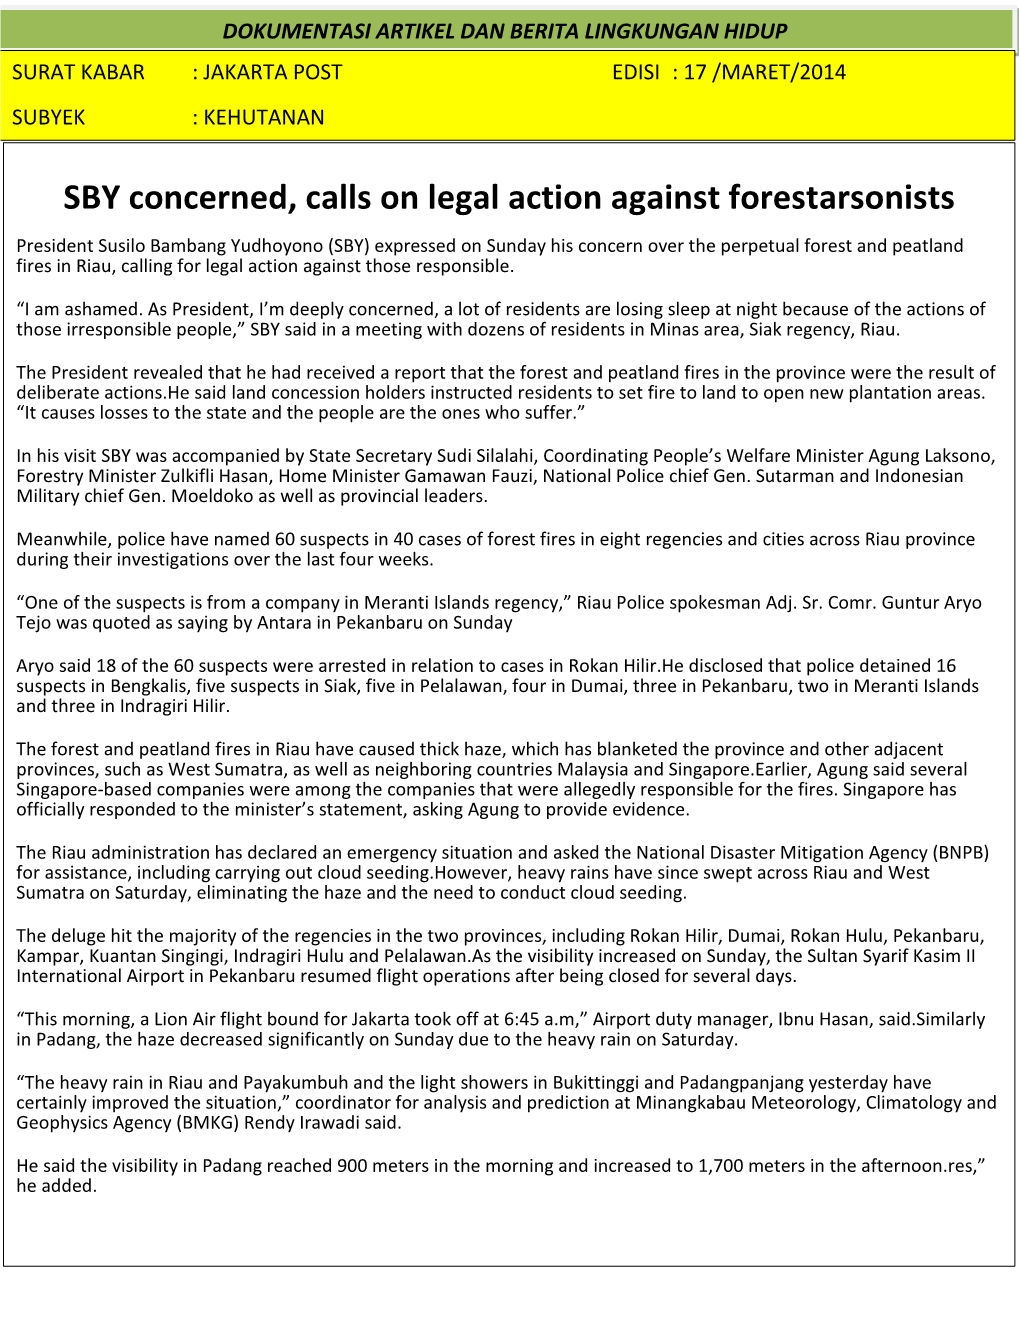 SBY Concerned, Calls on Legal Action Against Forestarsonists